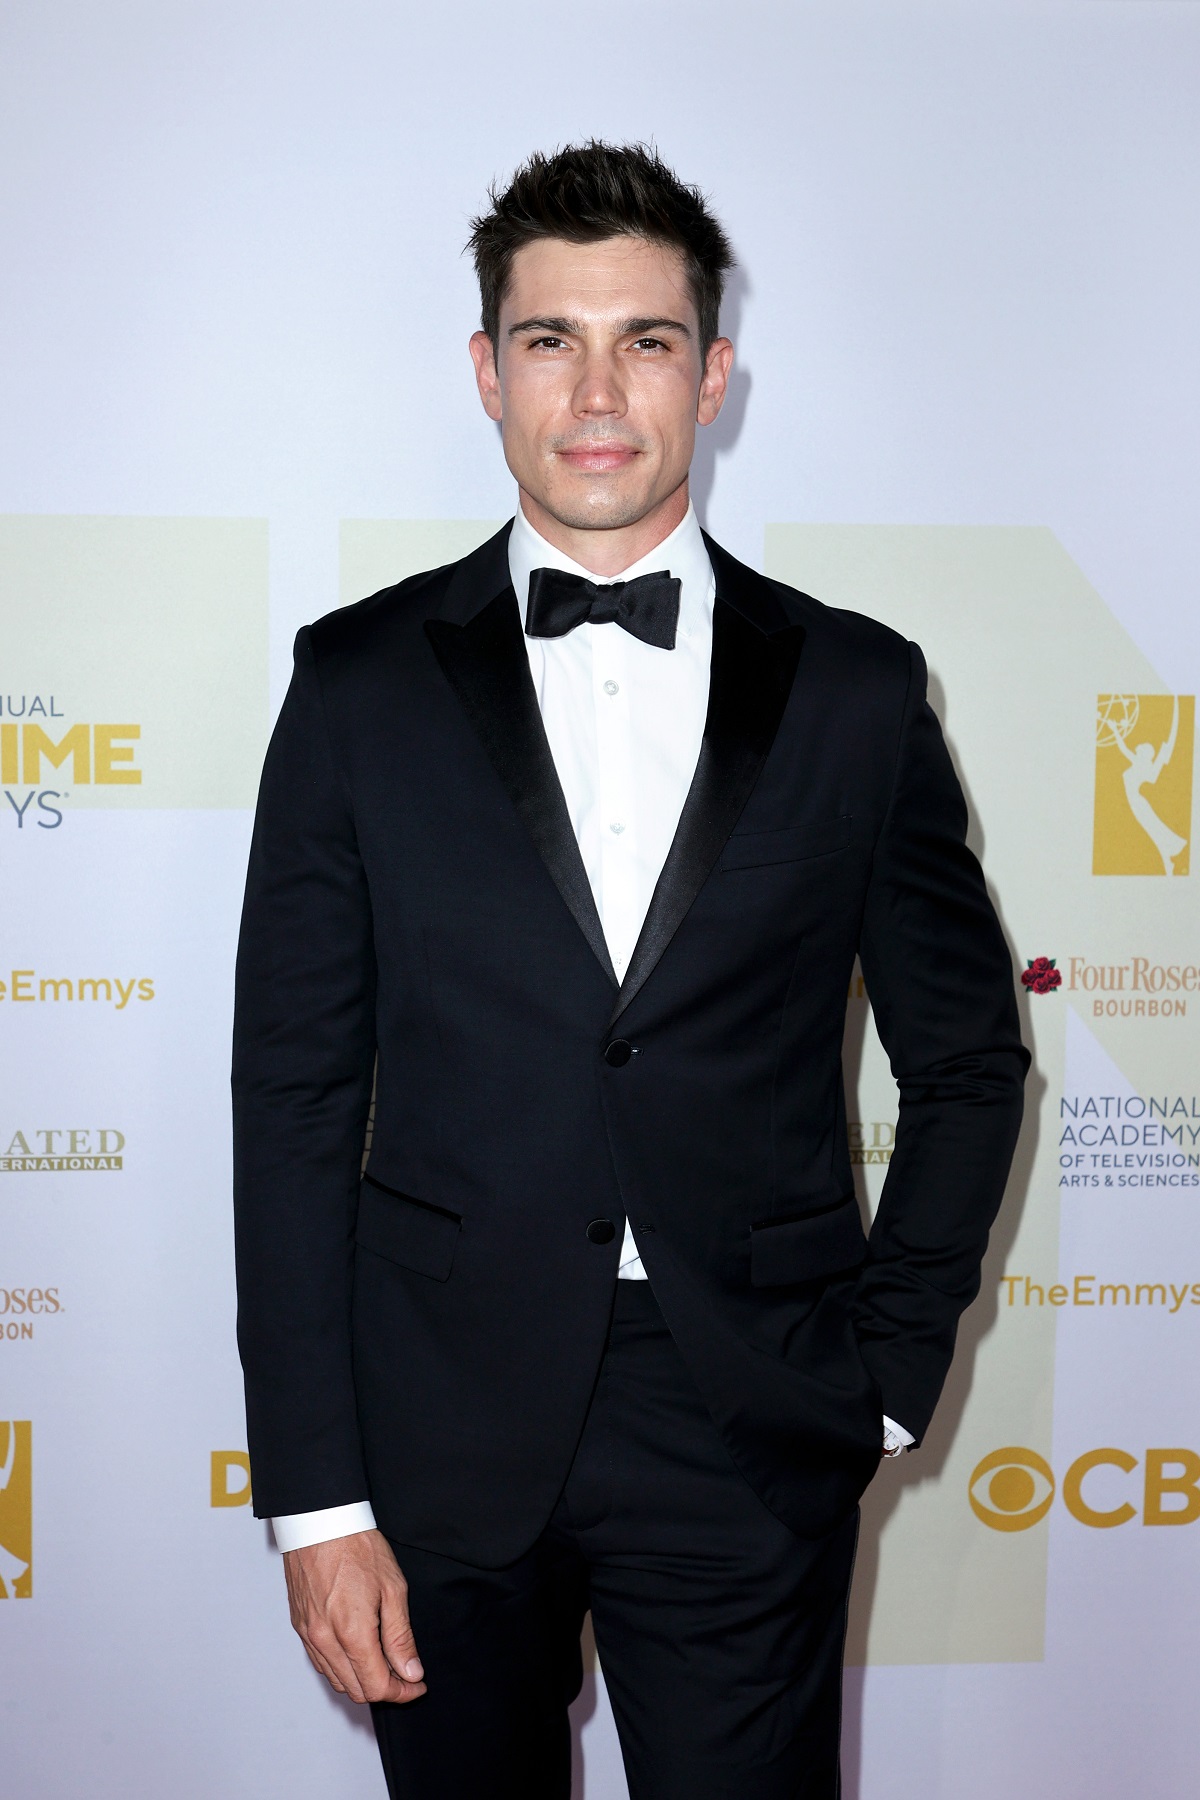 'The Bold and the Beautiful' actor Tanner Novlan dressed in a tuxedo at the 2021 Daytime Emmy Awards.